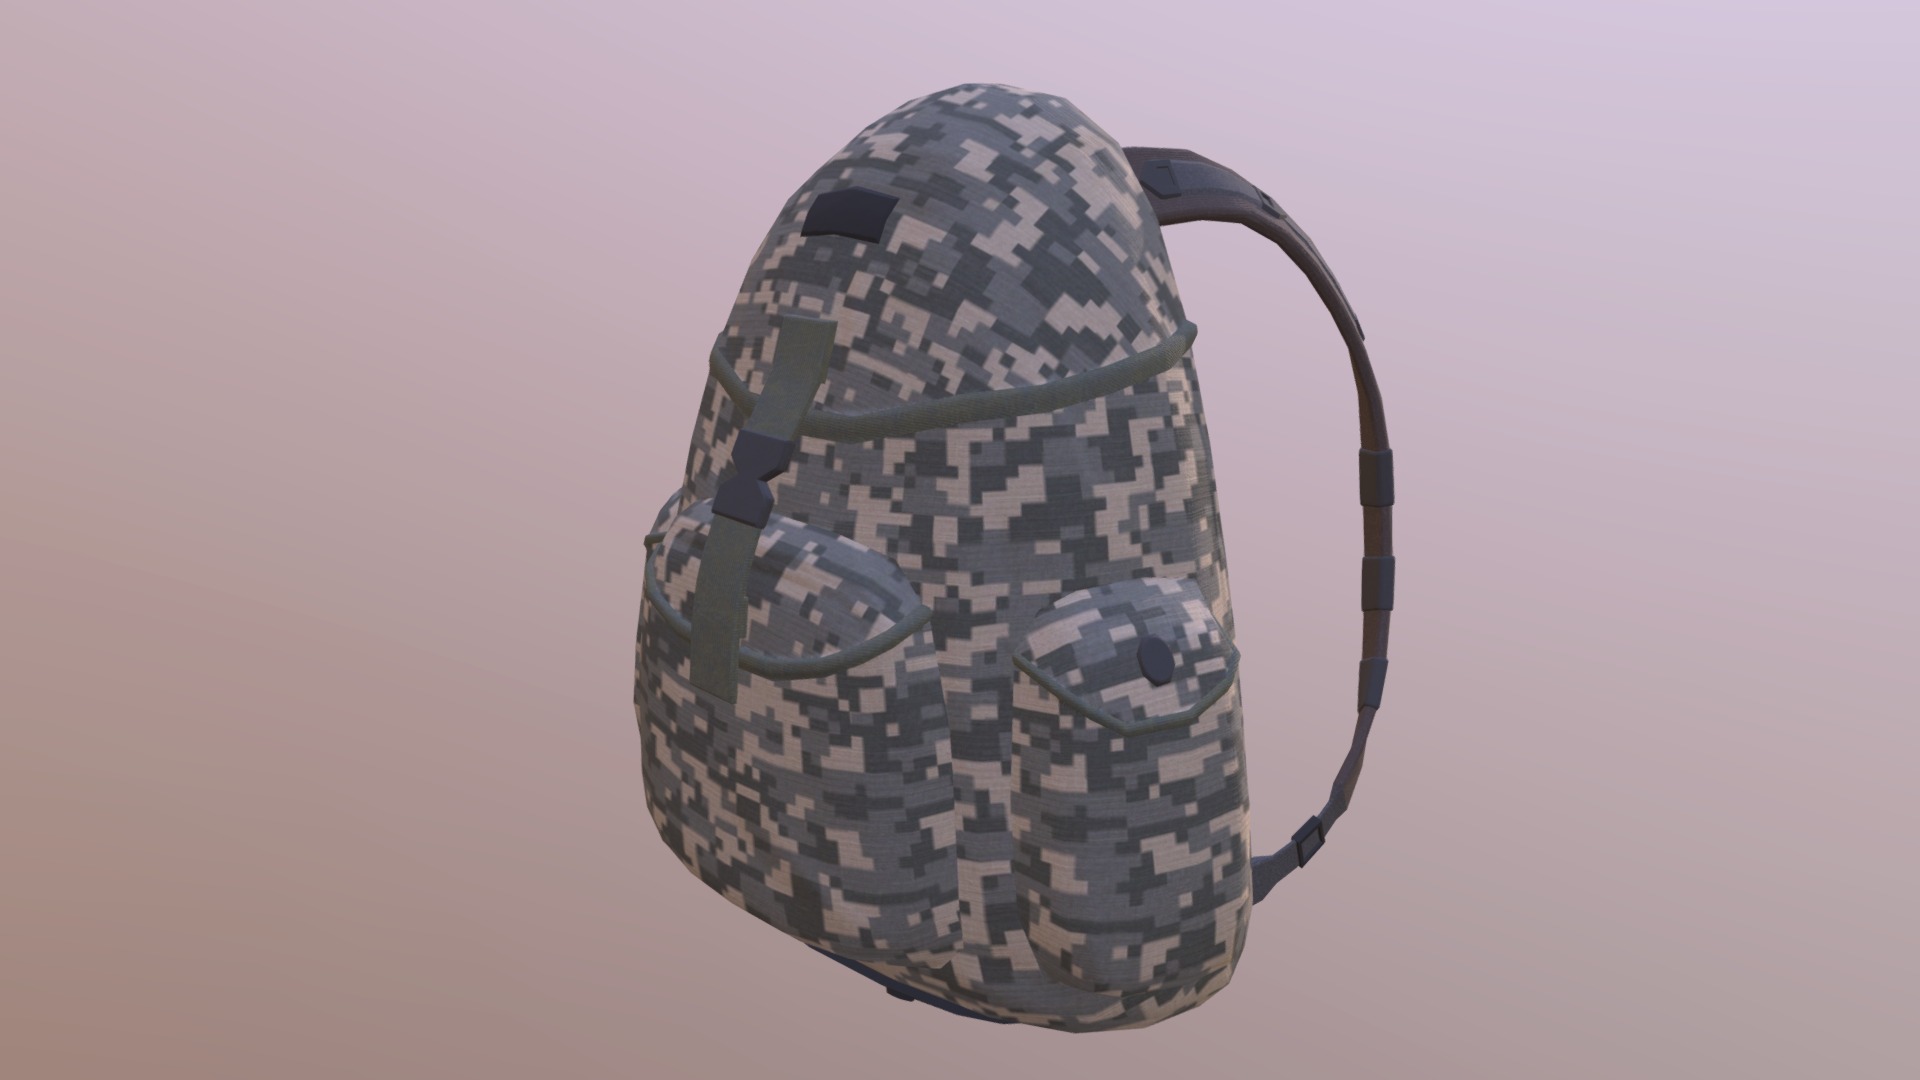 Backpack for the game "Trying or Dying"